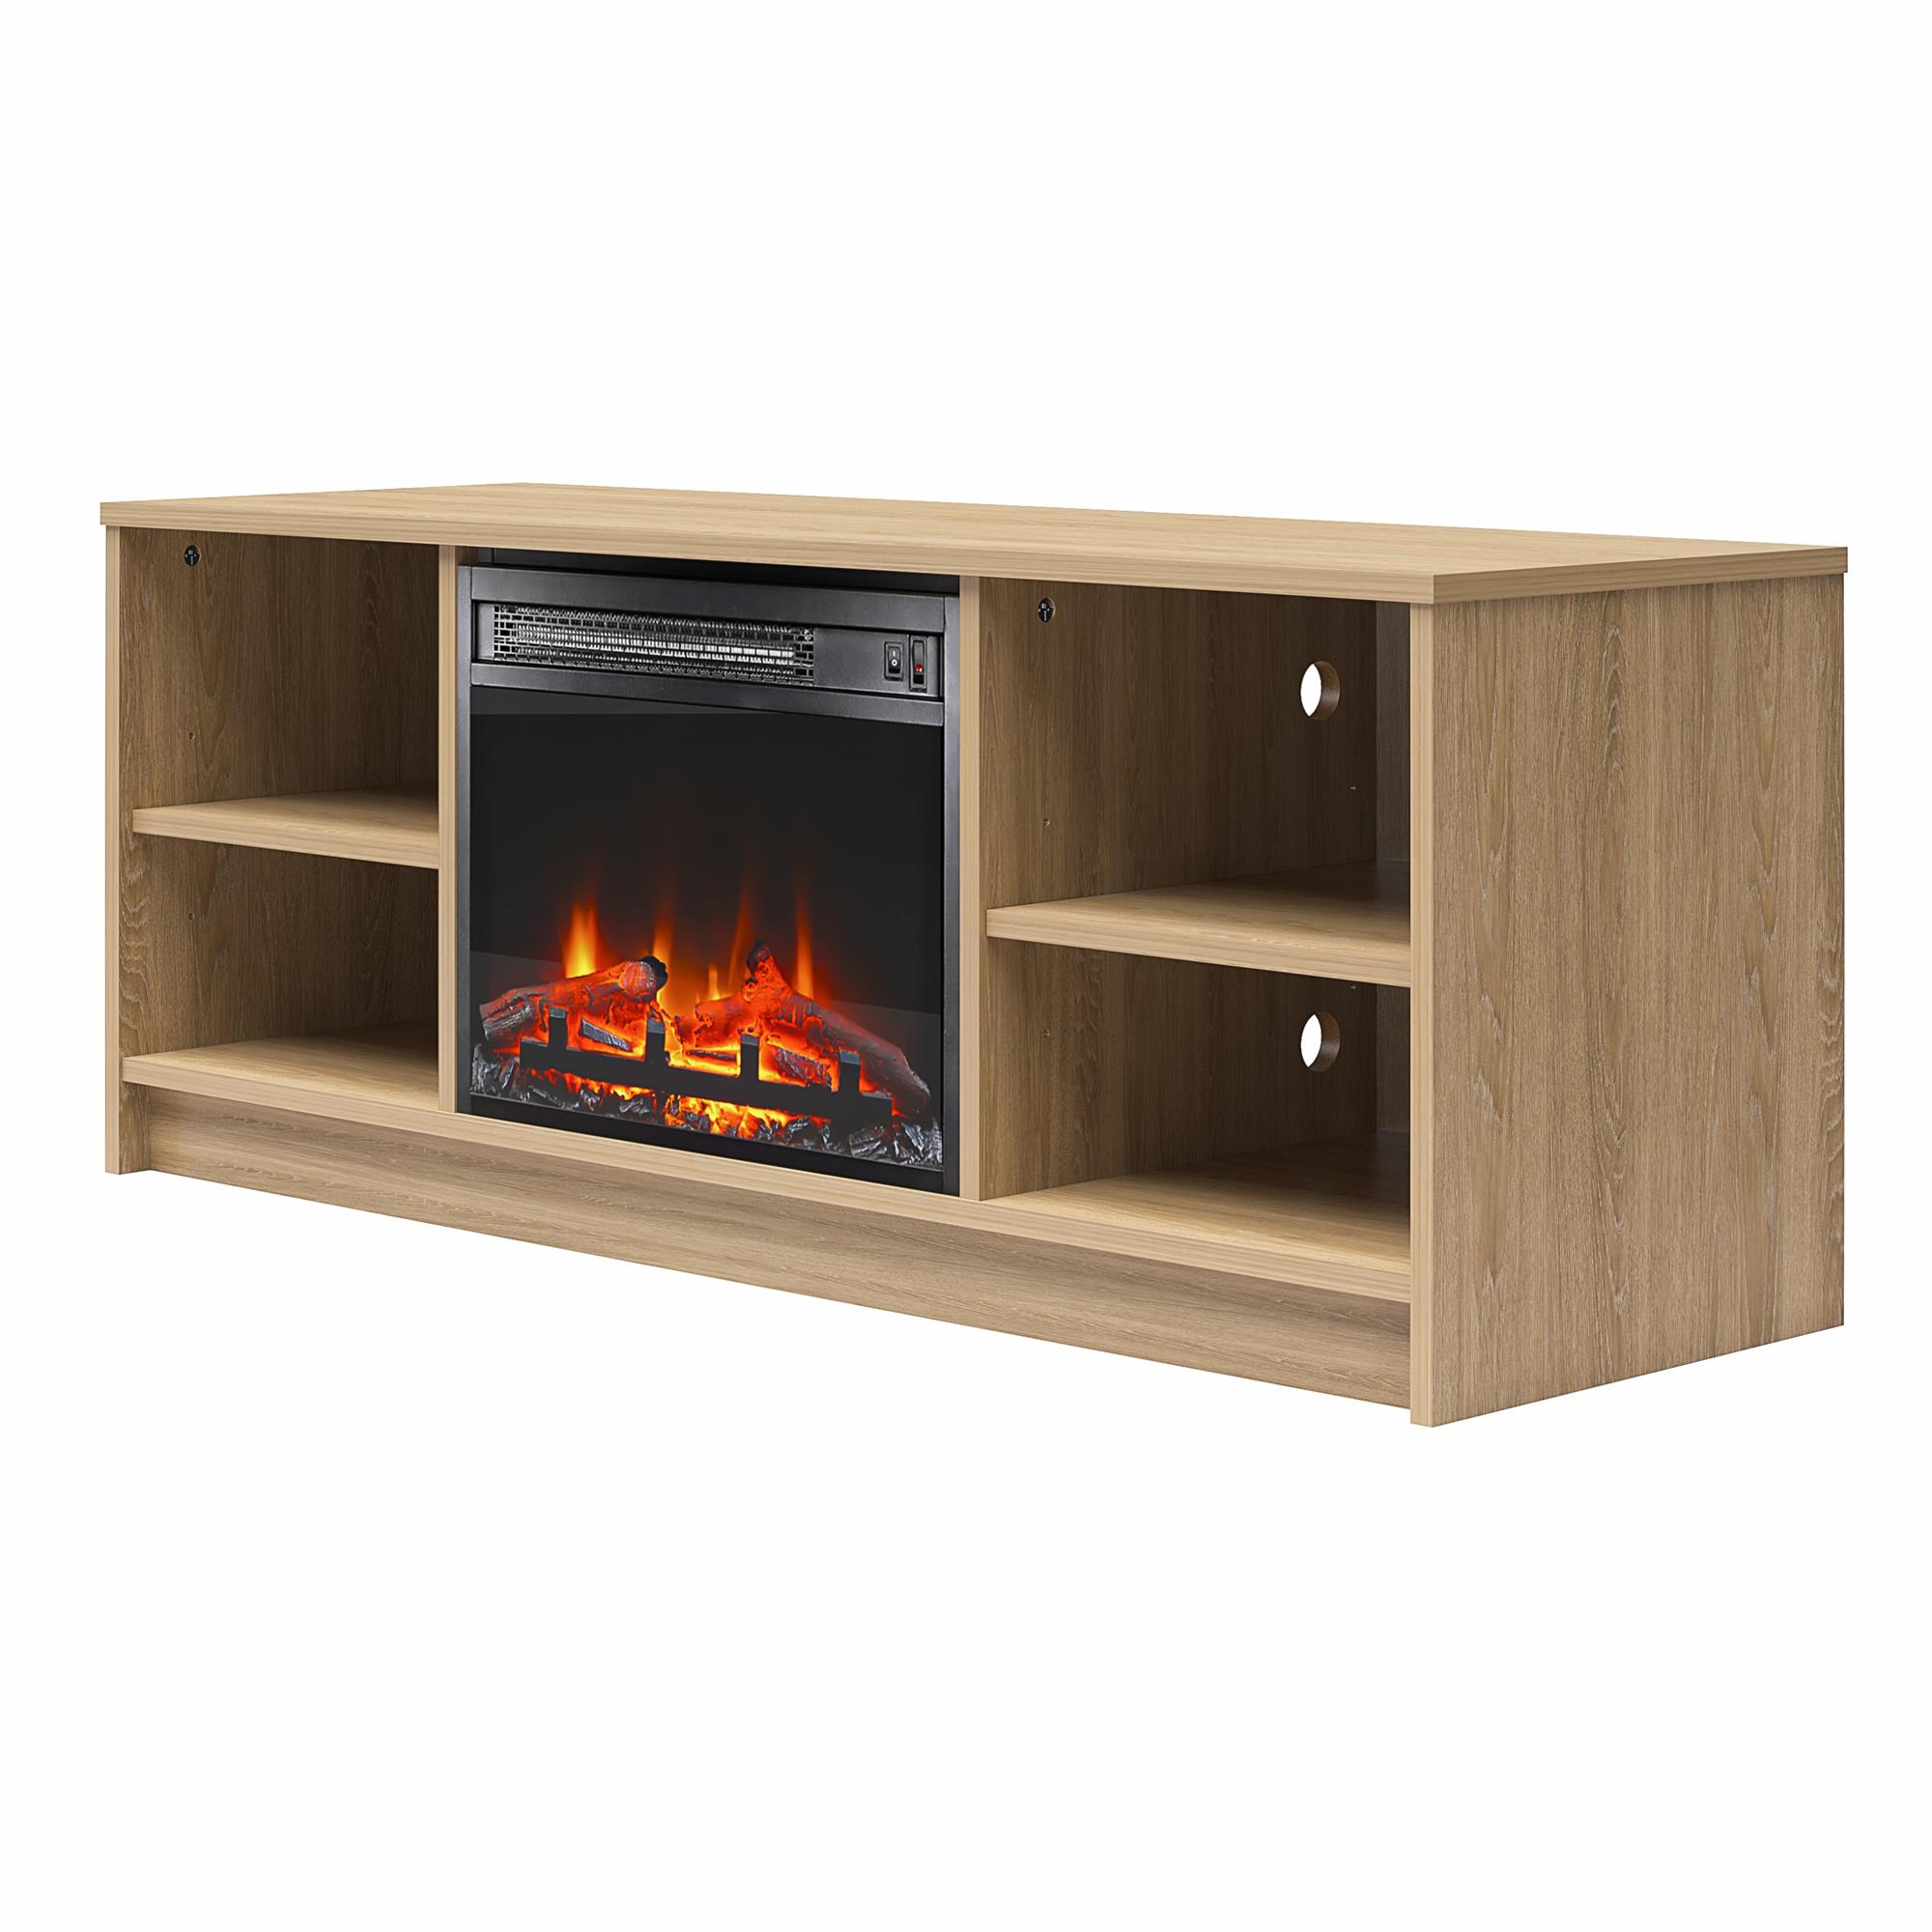 Mainstays Fireplace TV Stand, for TVs up to 55", Natural - image 3 of 12